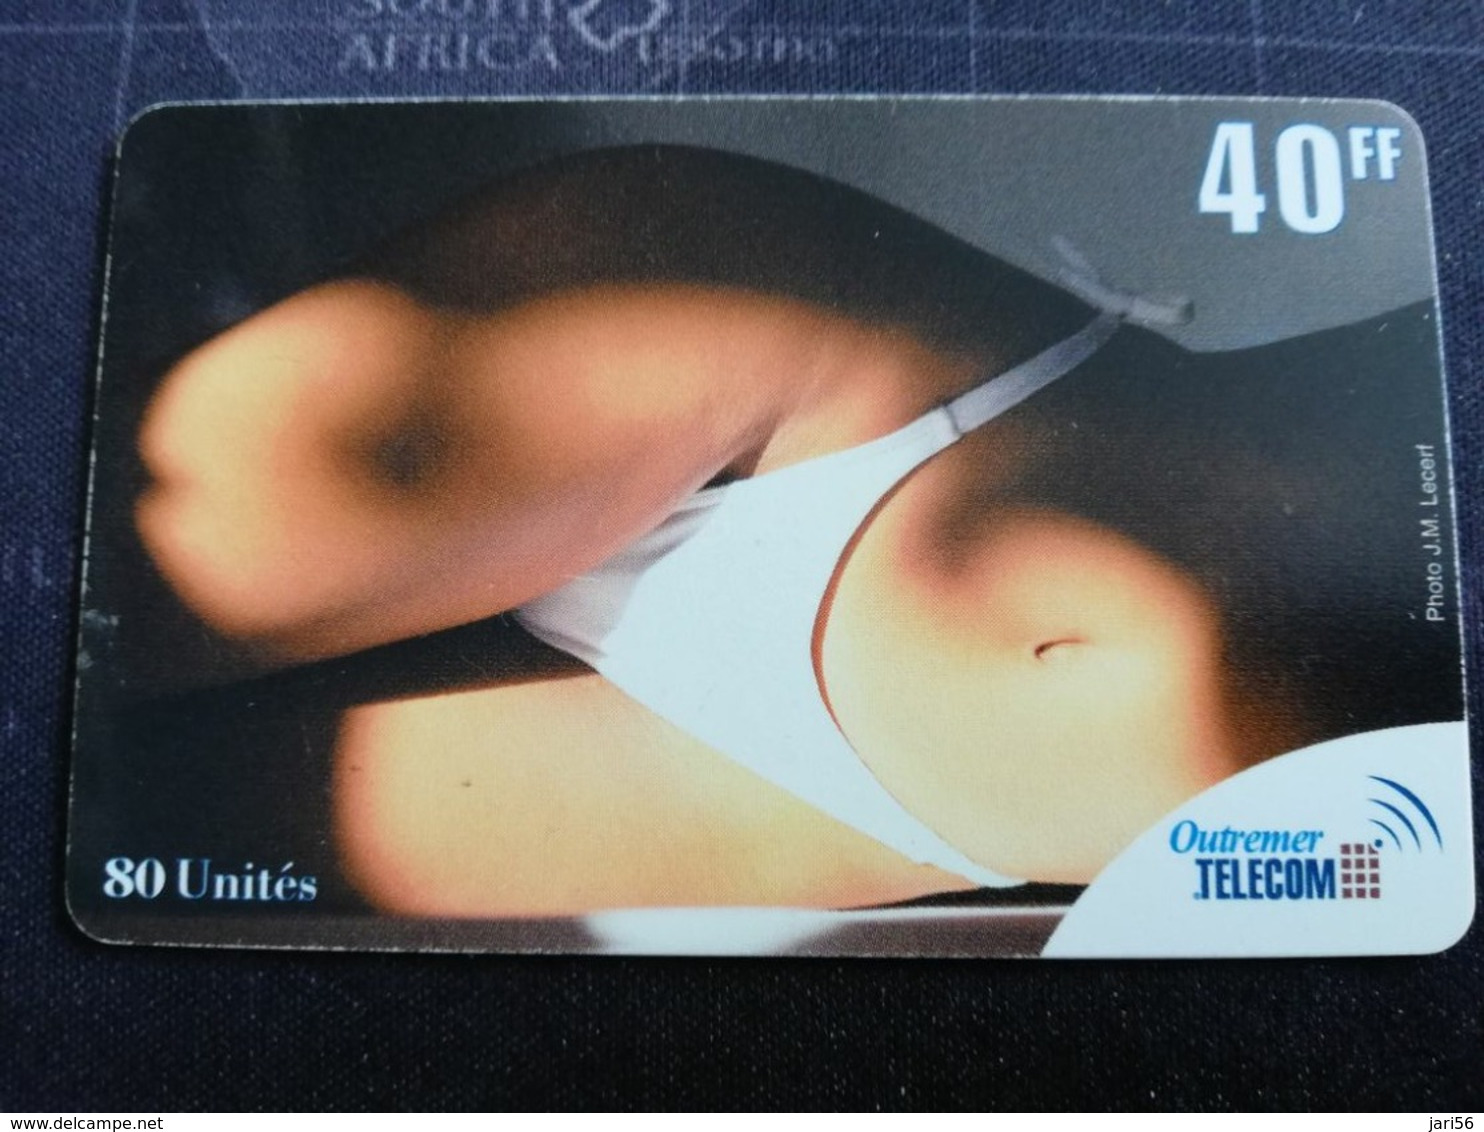 Caribbean Phonecard St Martin French  40 UNITS NICE  LADY IN BIKINI  OUTREMER TELECOM     **3033 ** - Antilles (French)